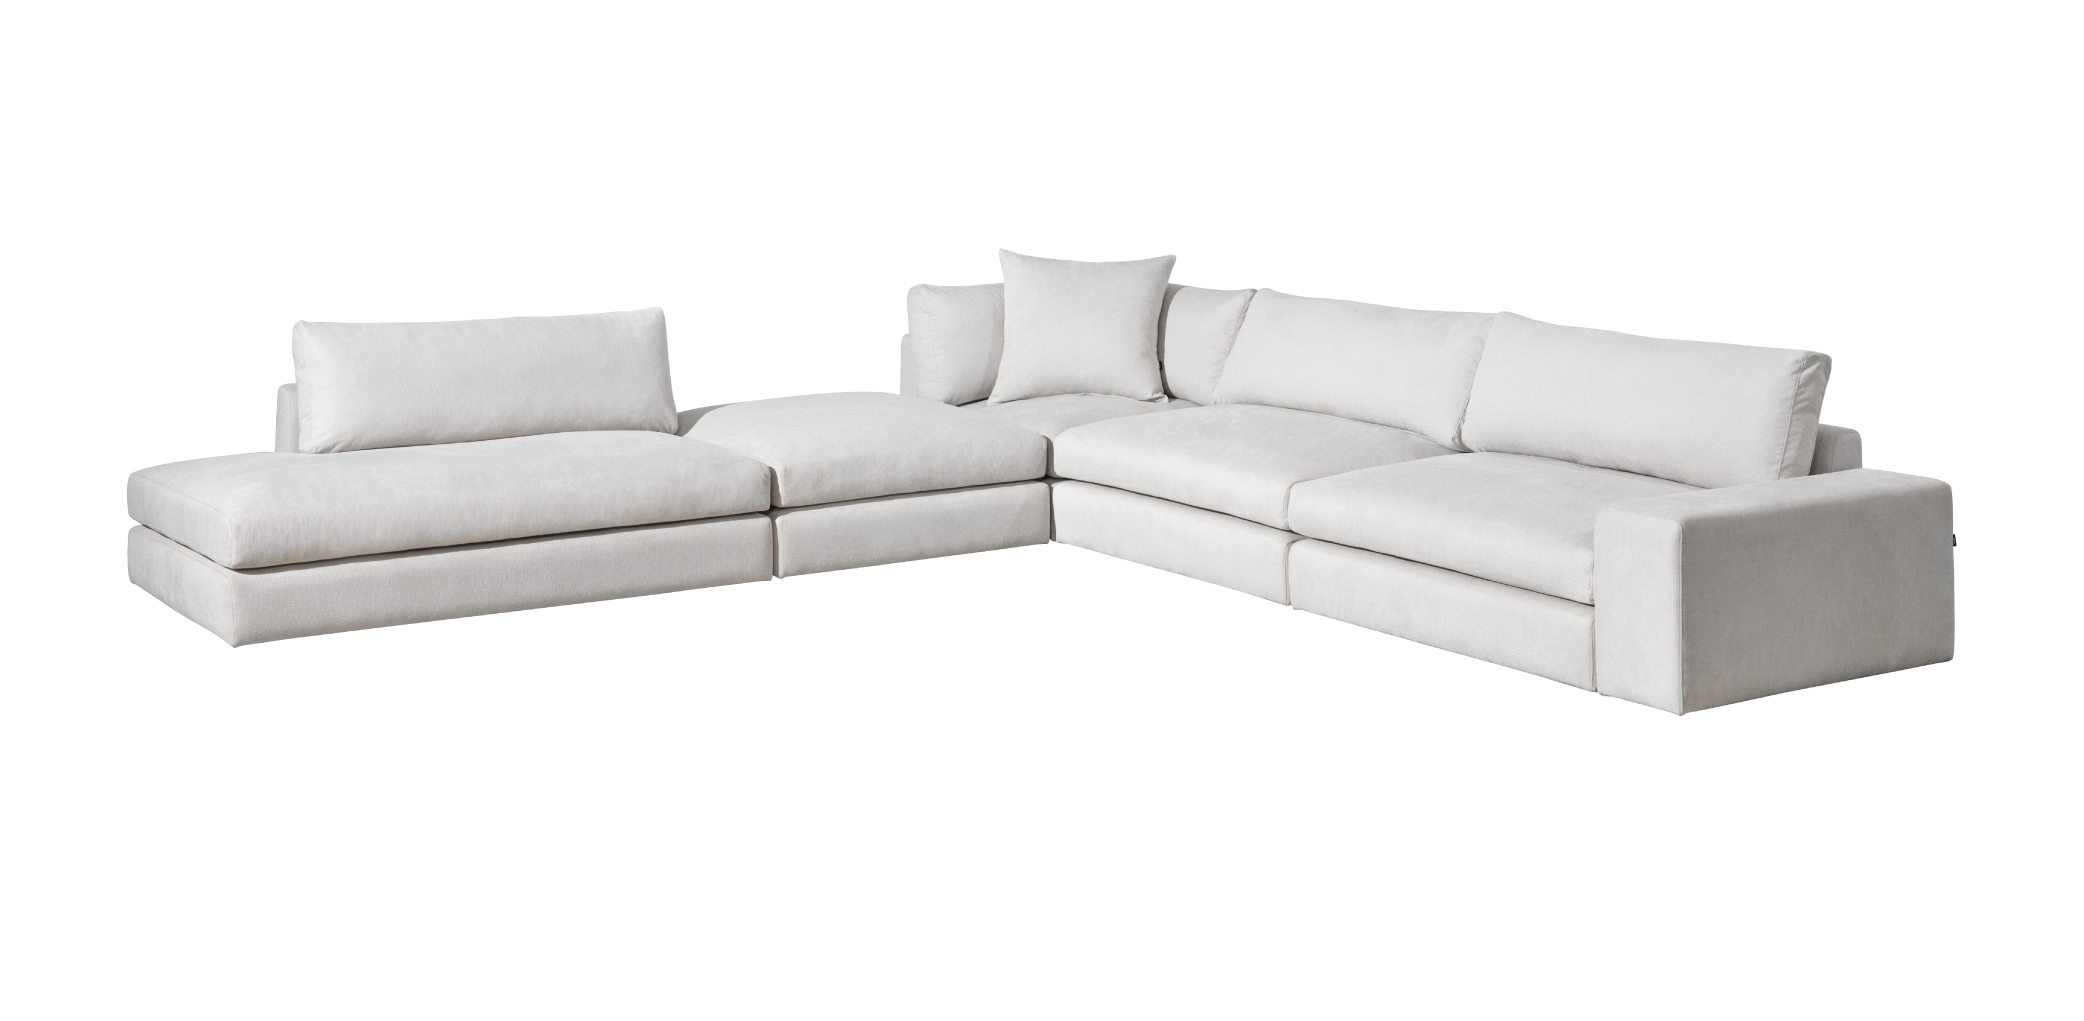 https://zerofurniture.vn/static/2975/2023/12/11/product_classic_sectional_nsp.png